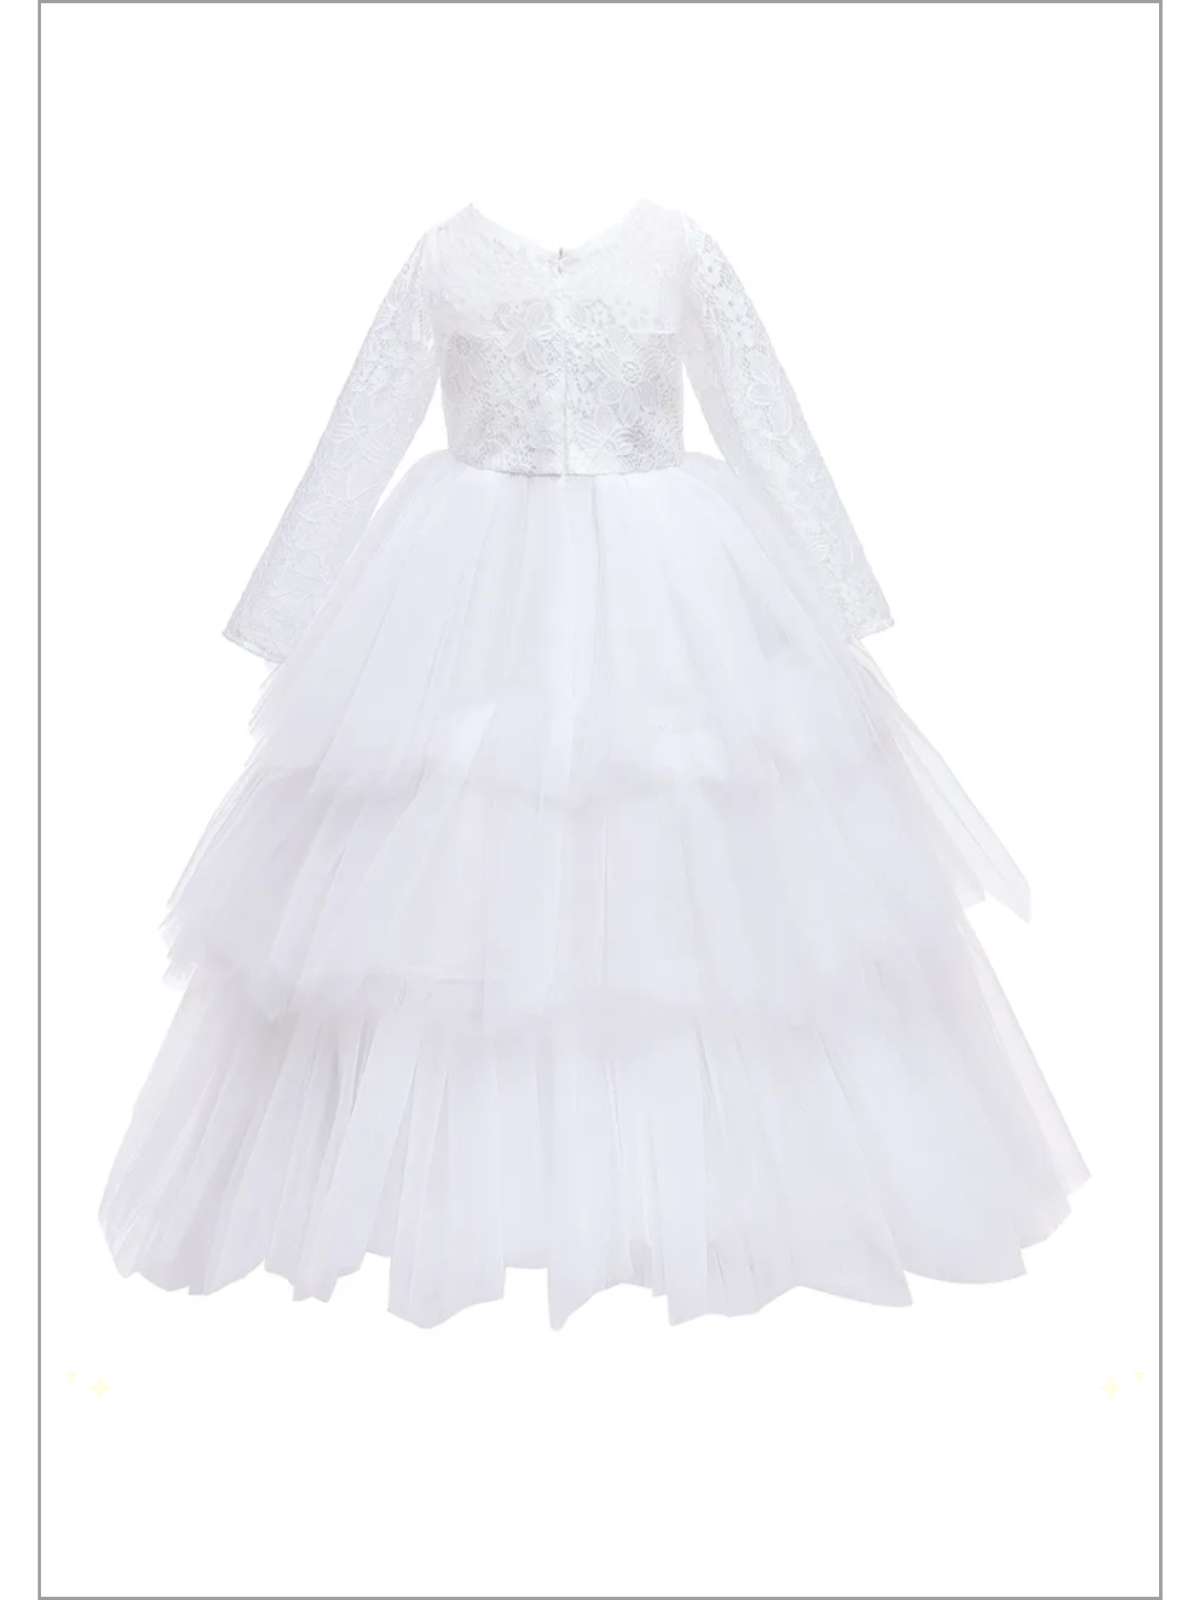 Mia Belle Girls Tiered Tulle Gown | Girls Communion Dresses